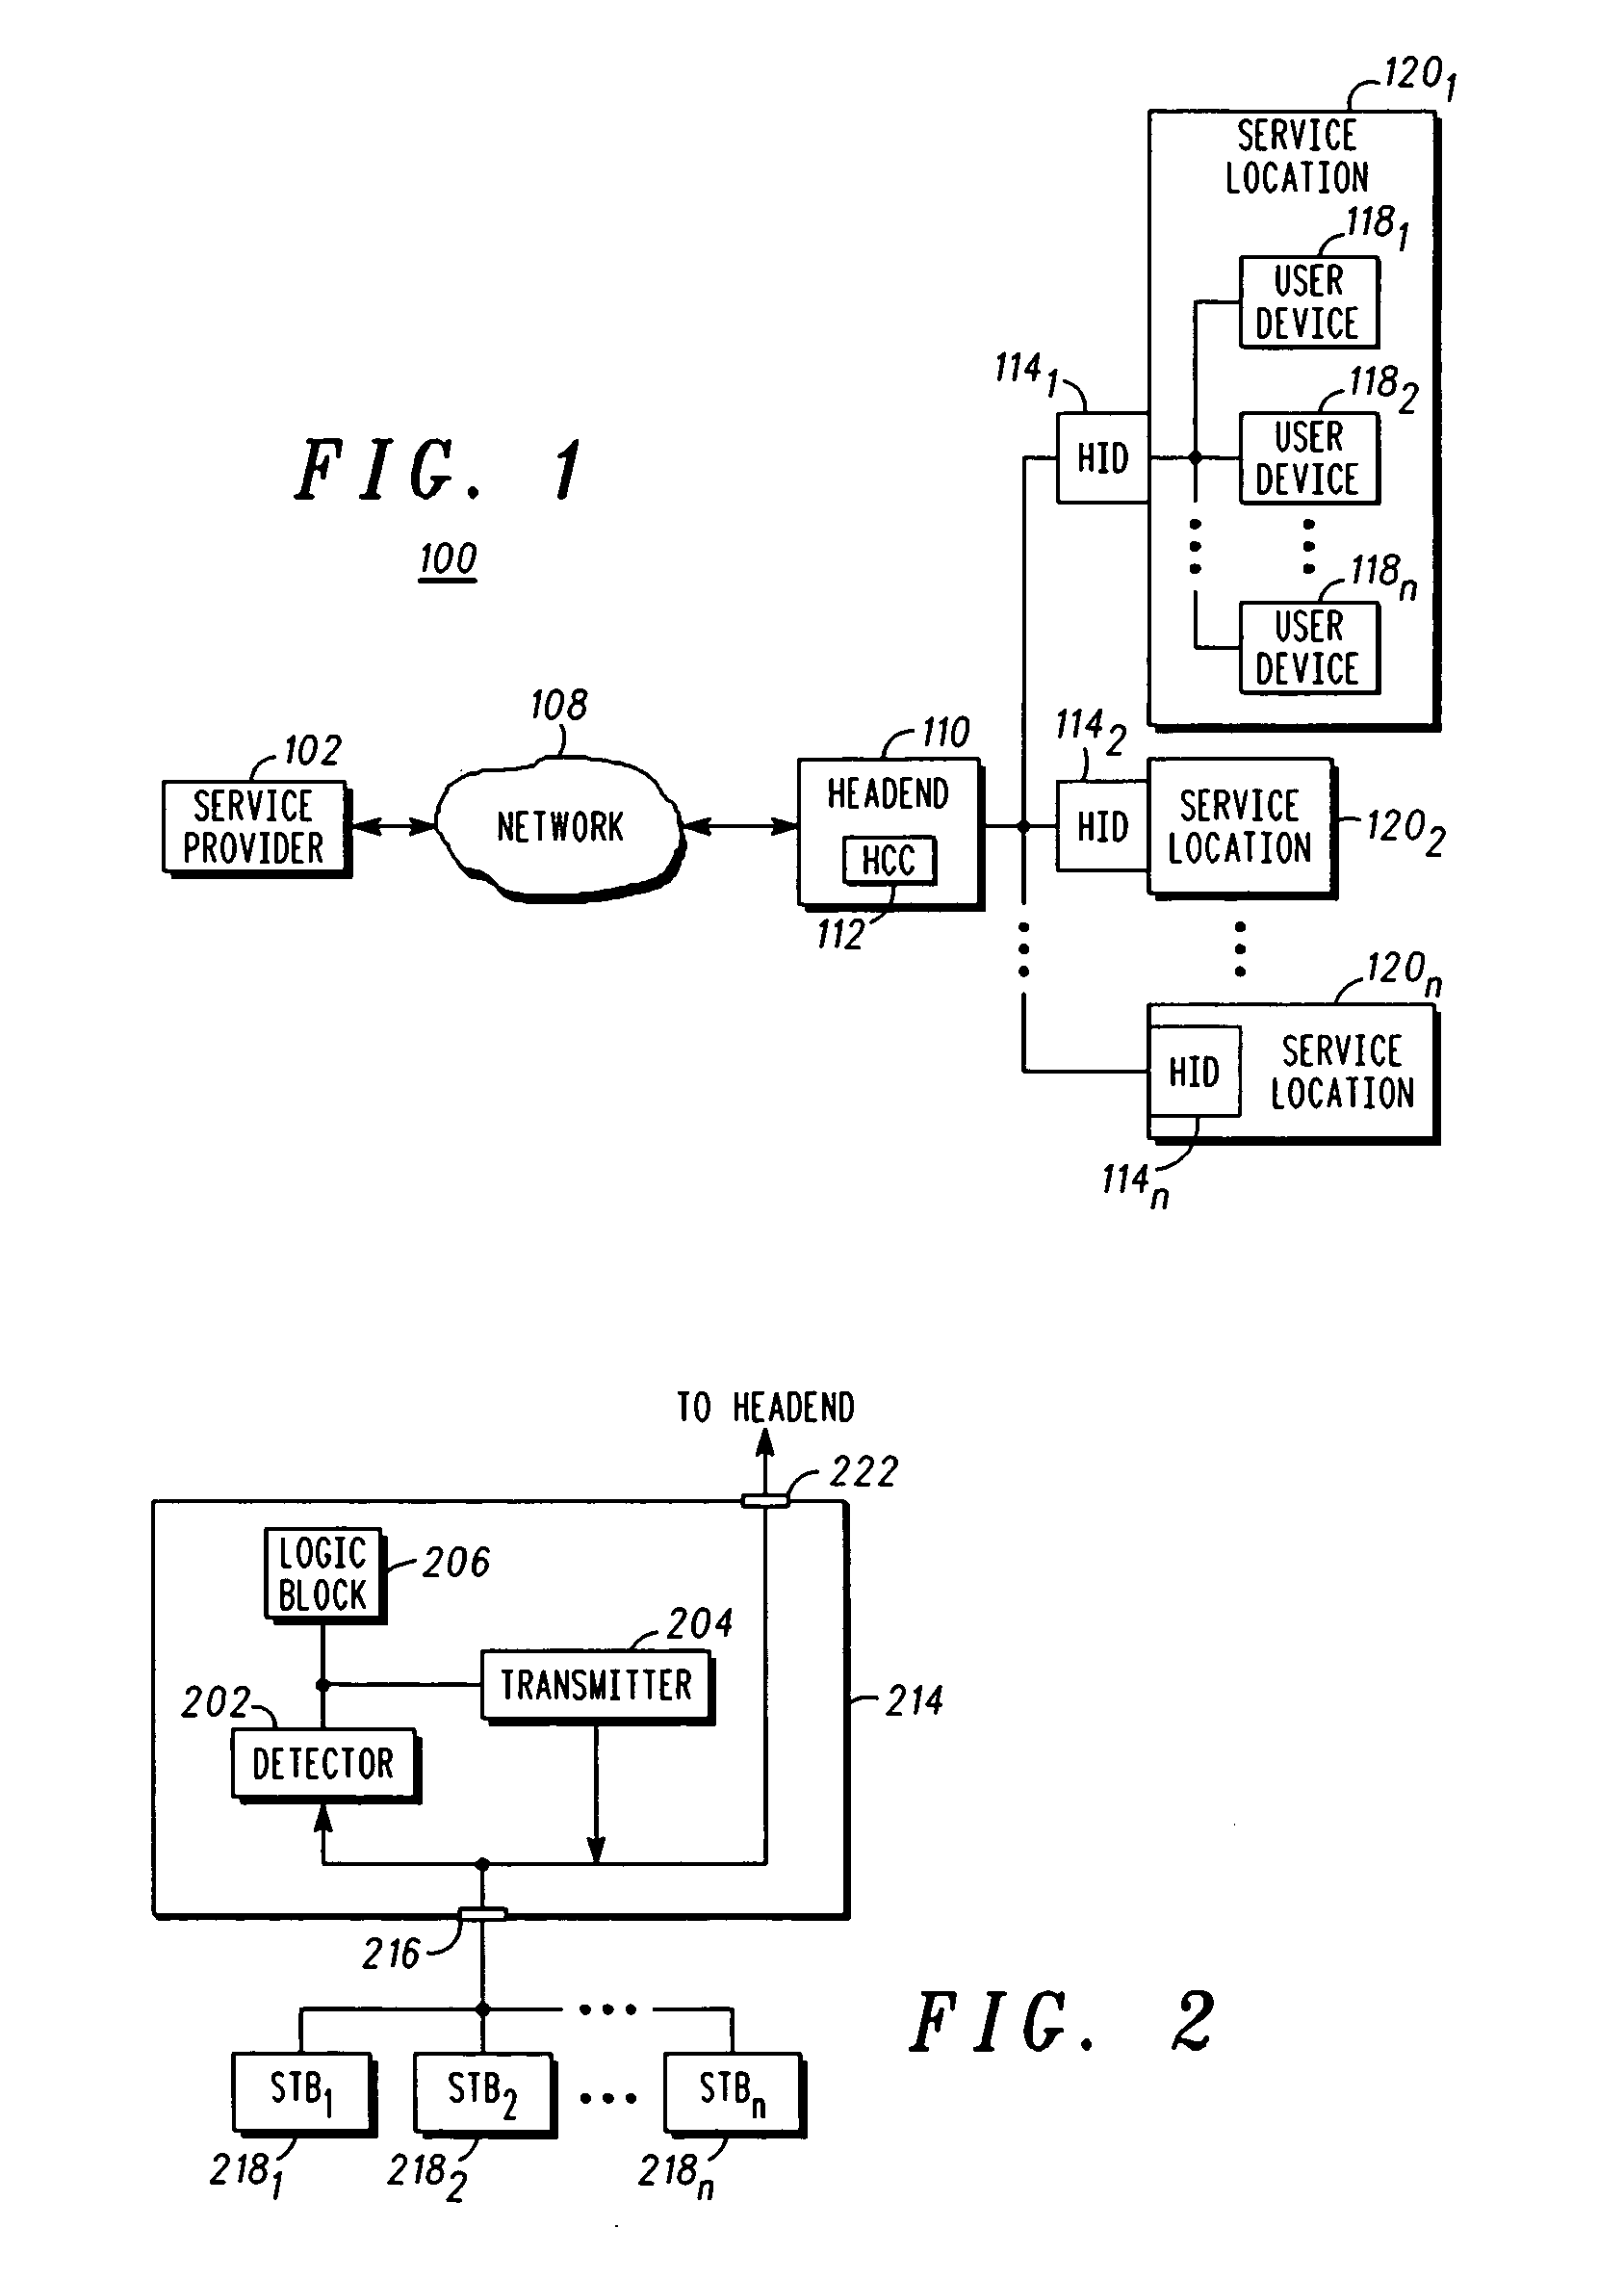 Method and apparatus for linking a plurality of user devices to a service location